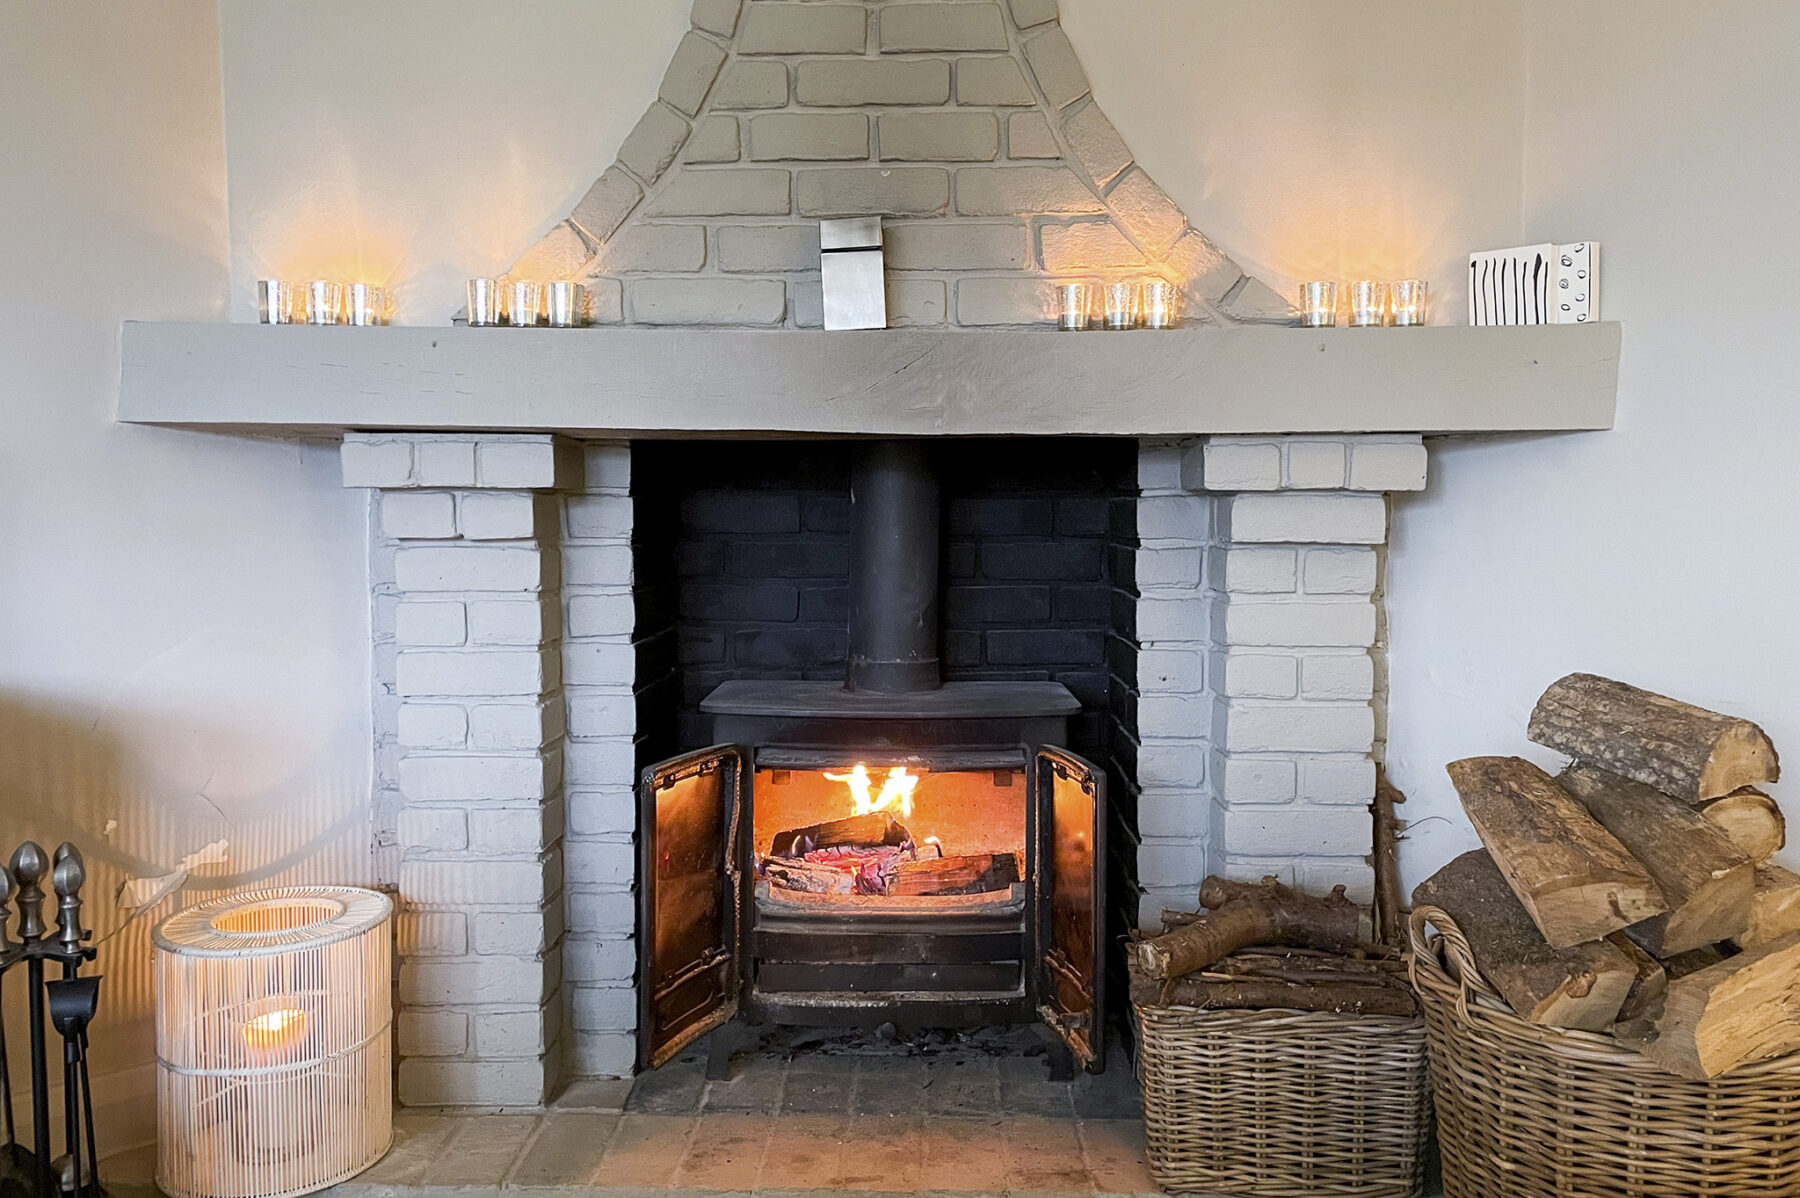 Dining room log fire basket bricks candles chimney hearth TV filming location hire lodge London 67